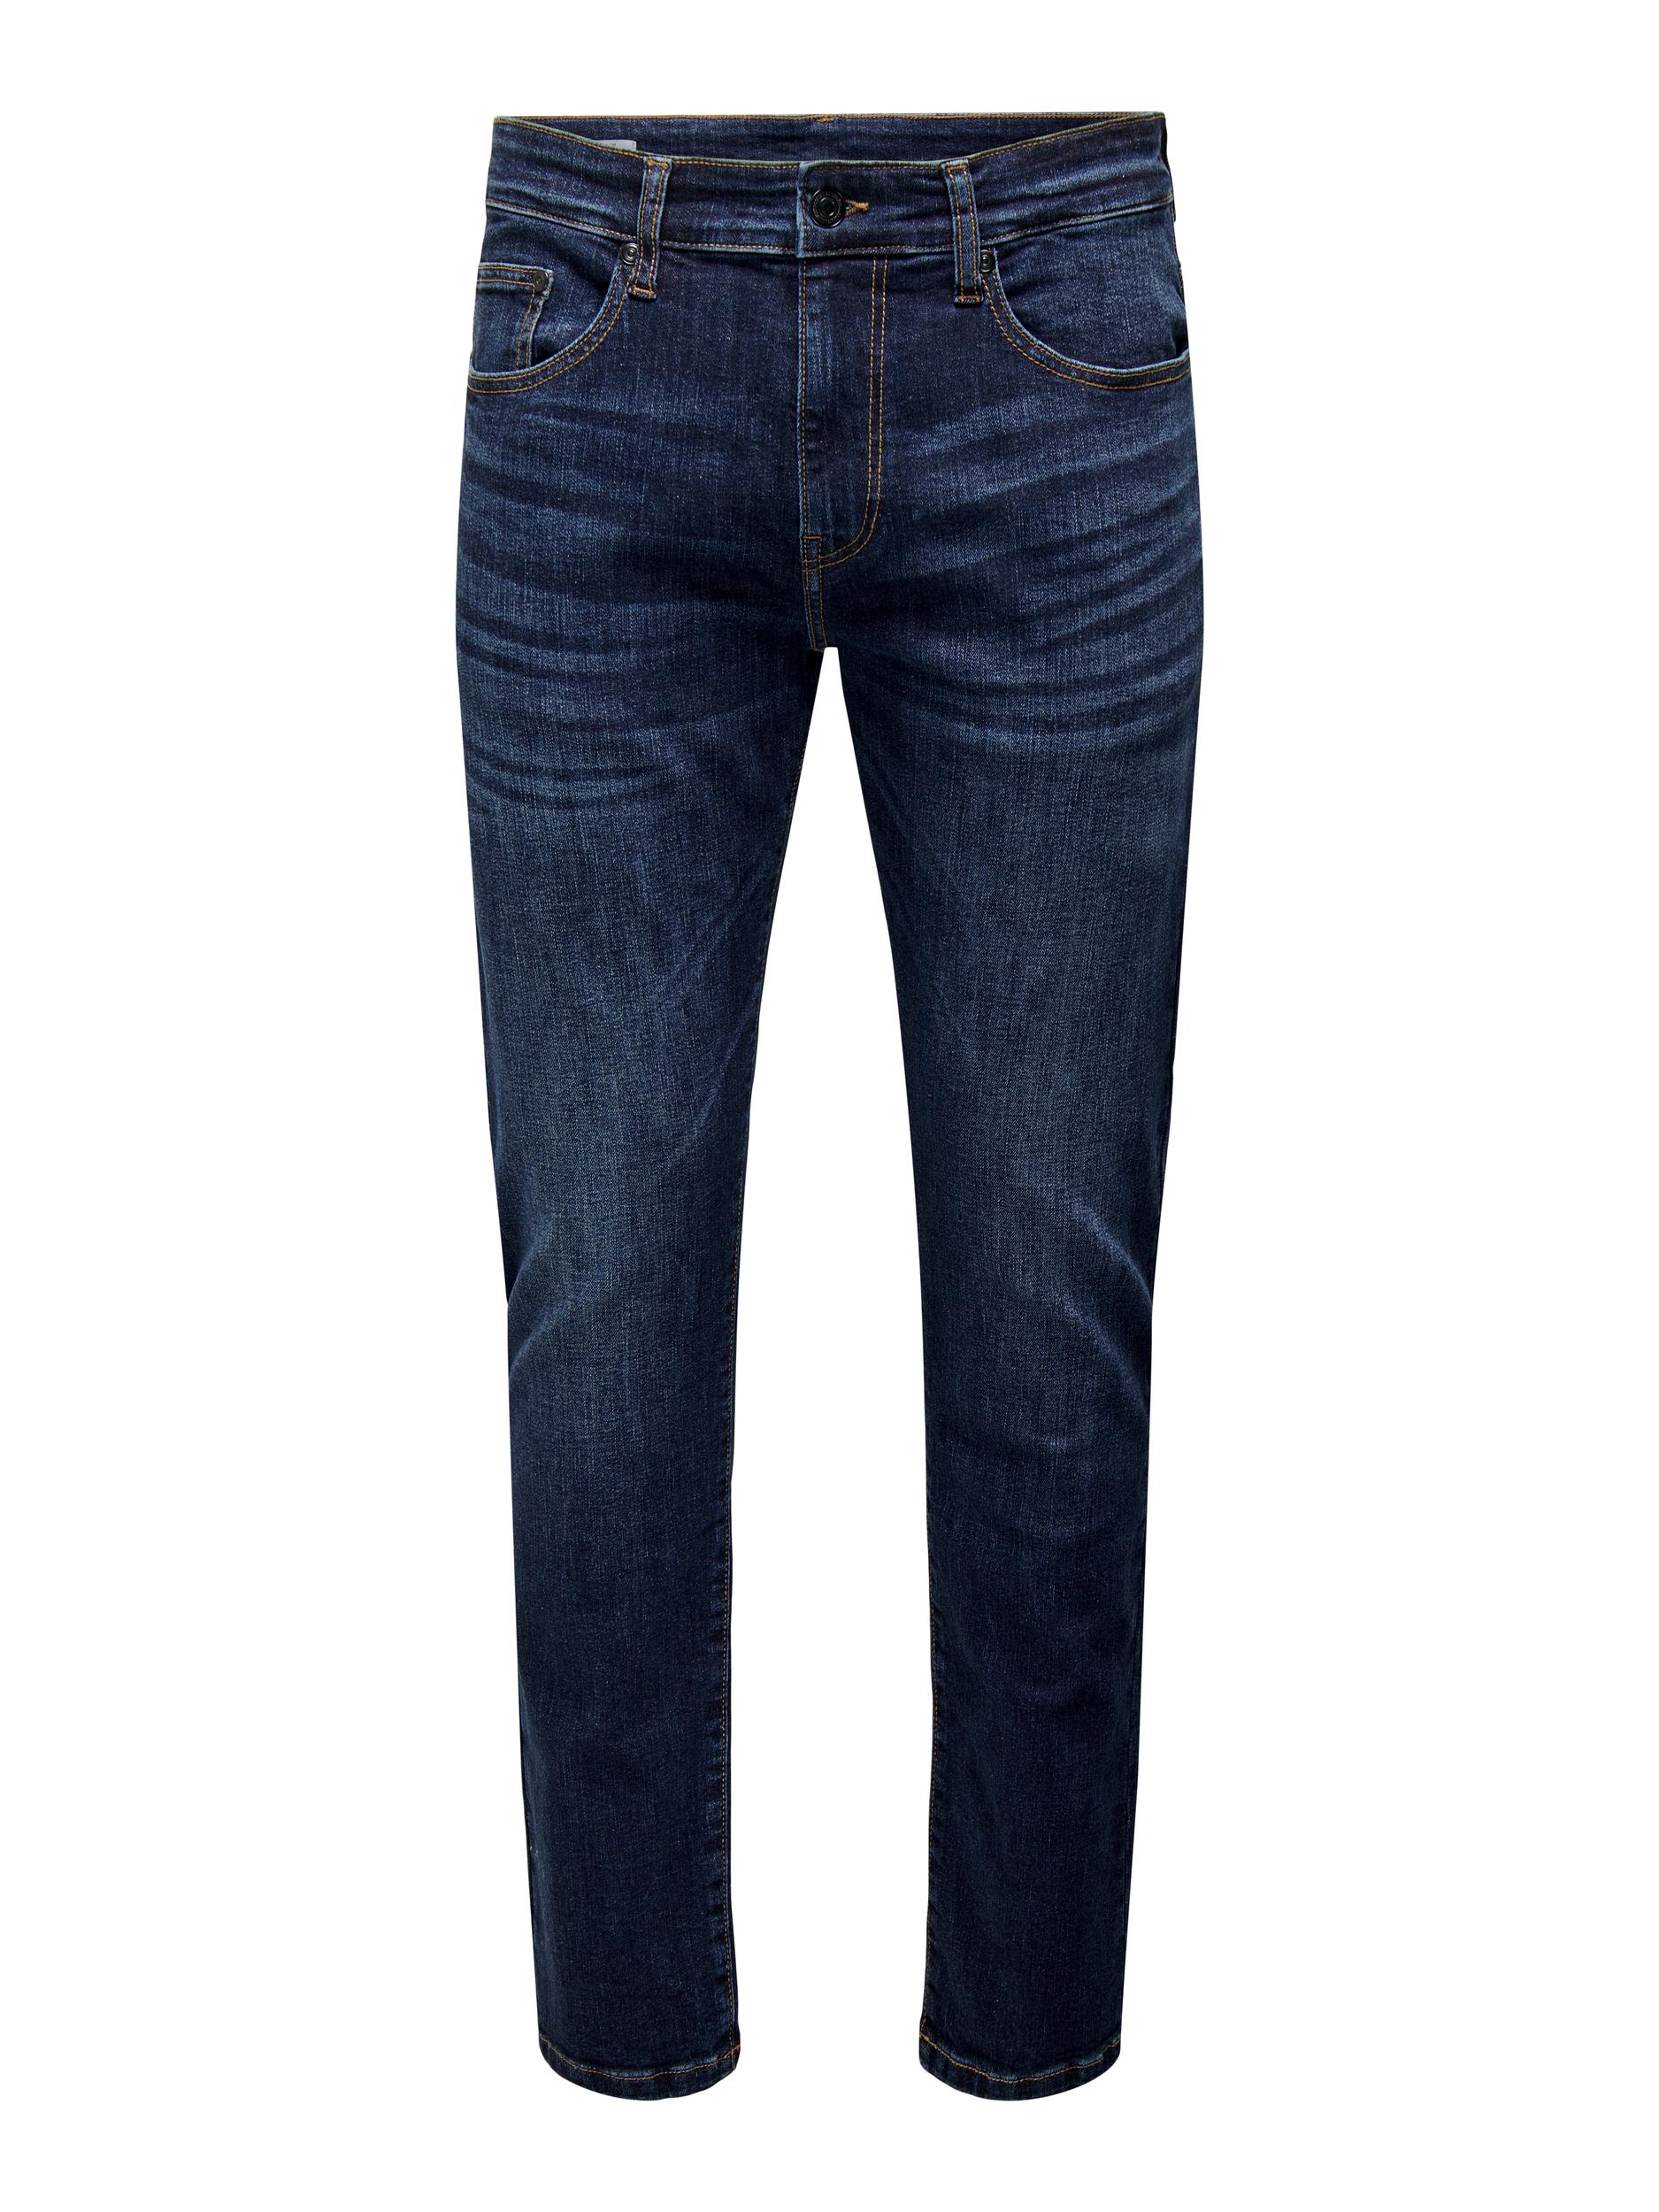 ONLY & SONS Straight-Jeans »ONSWEFT REG.DK. BLUE 6752 DNM JEANS NOOS« von ONLY & SONS